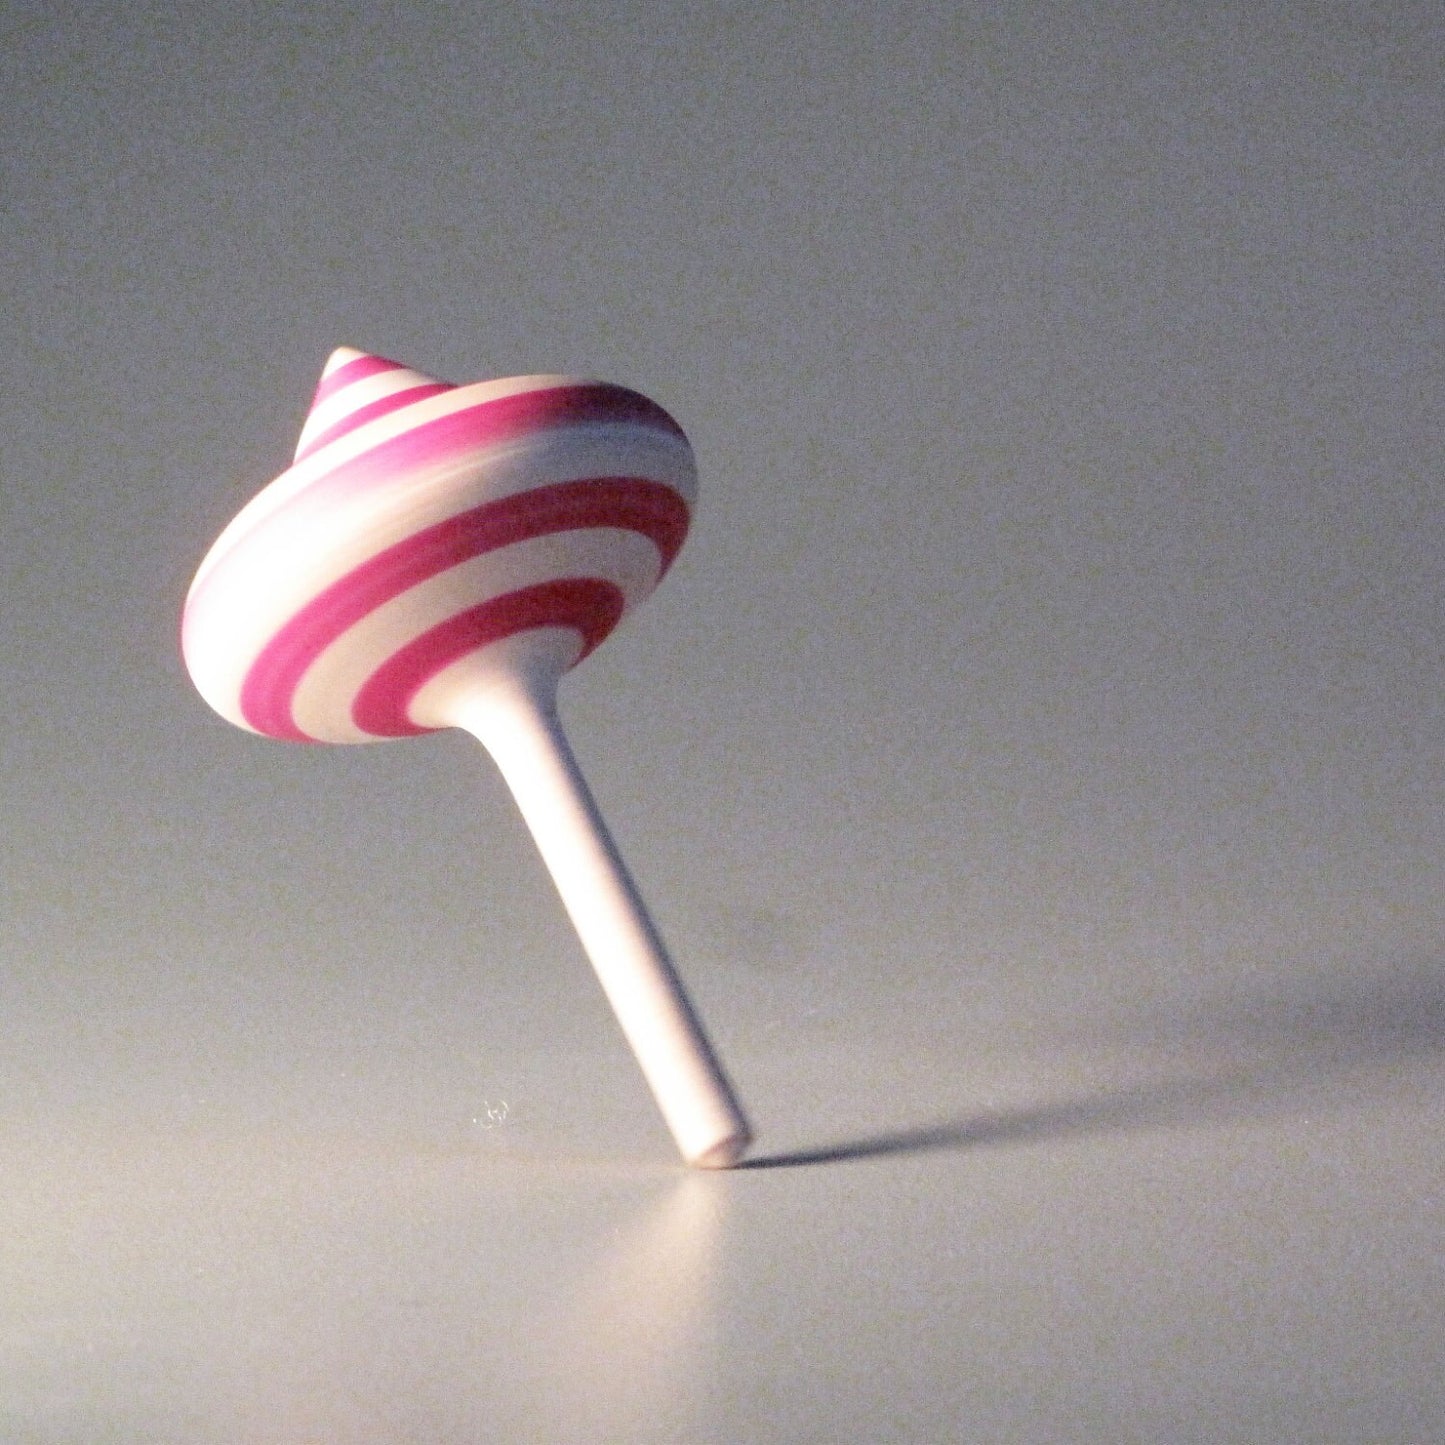 Toy spinning top with pink stripes